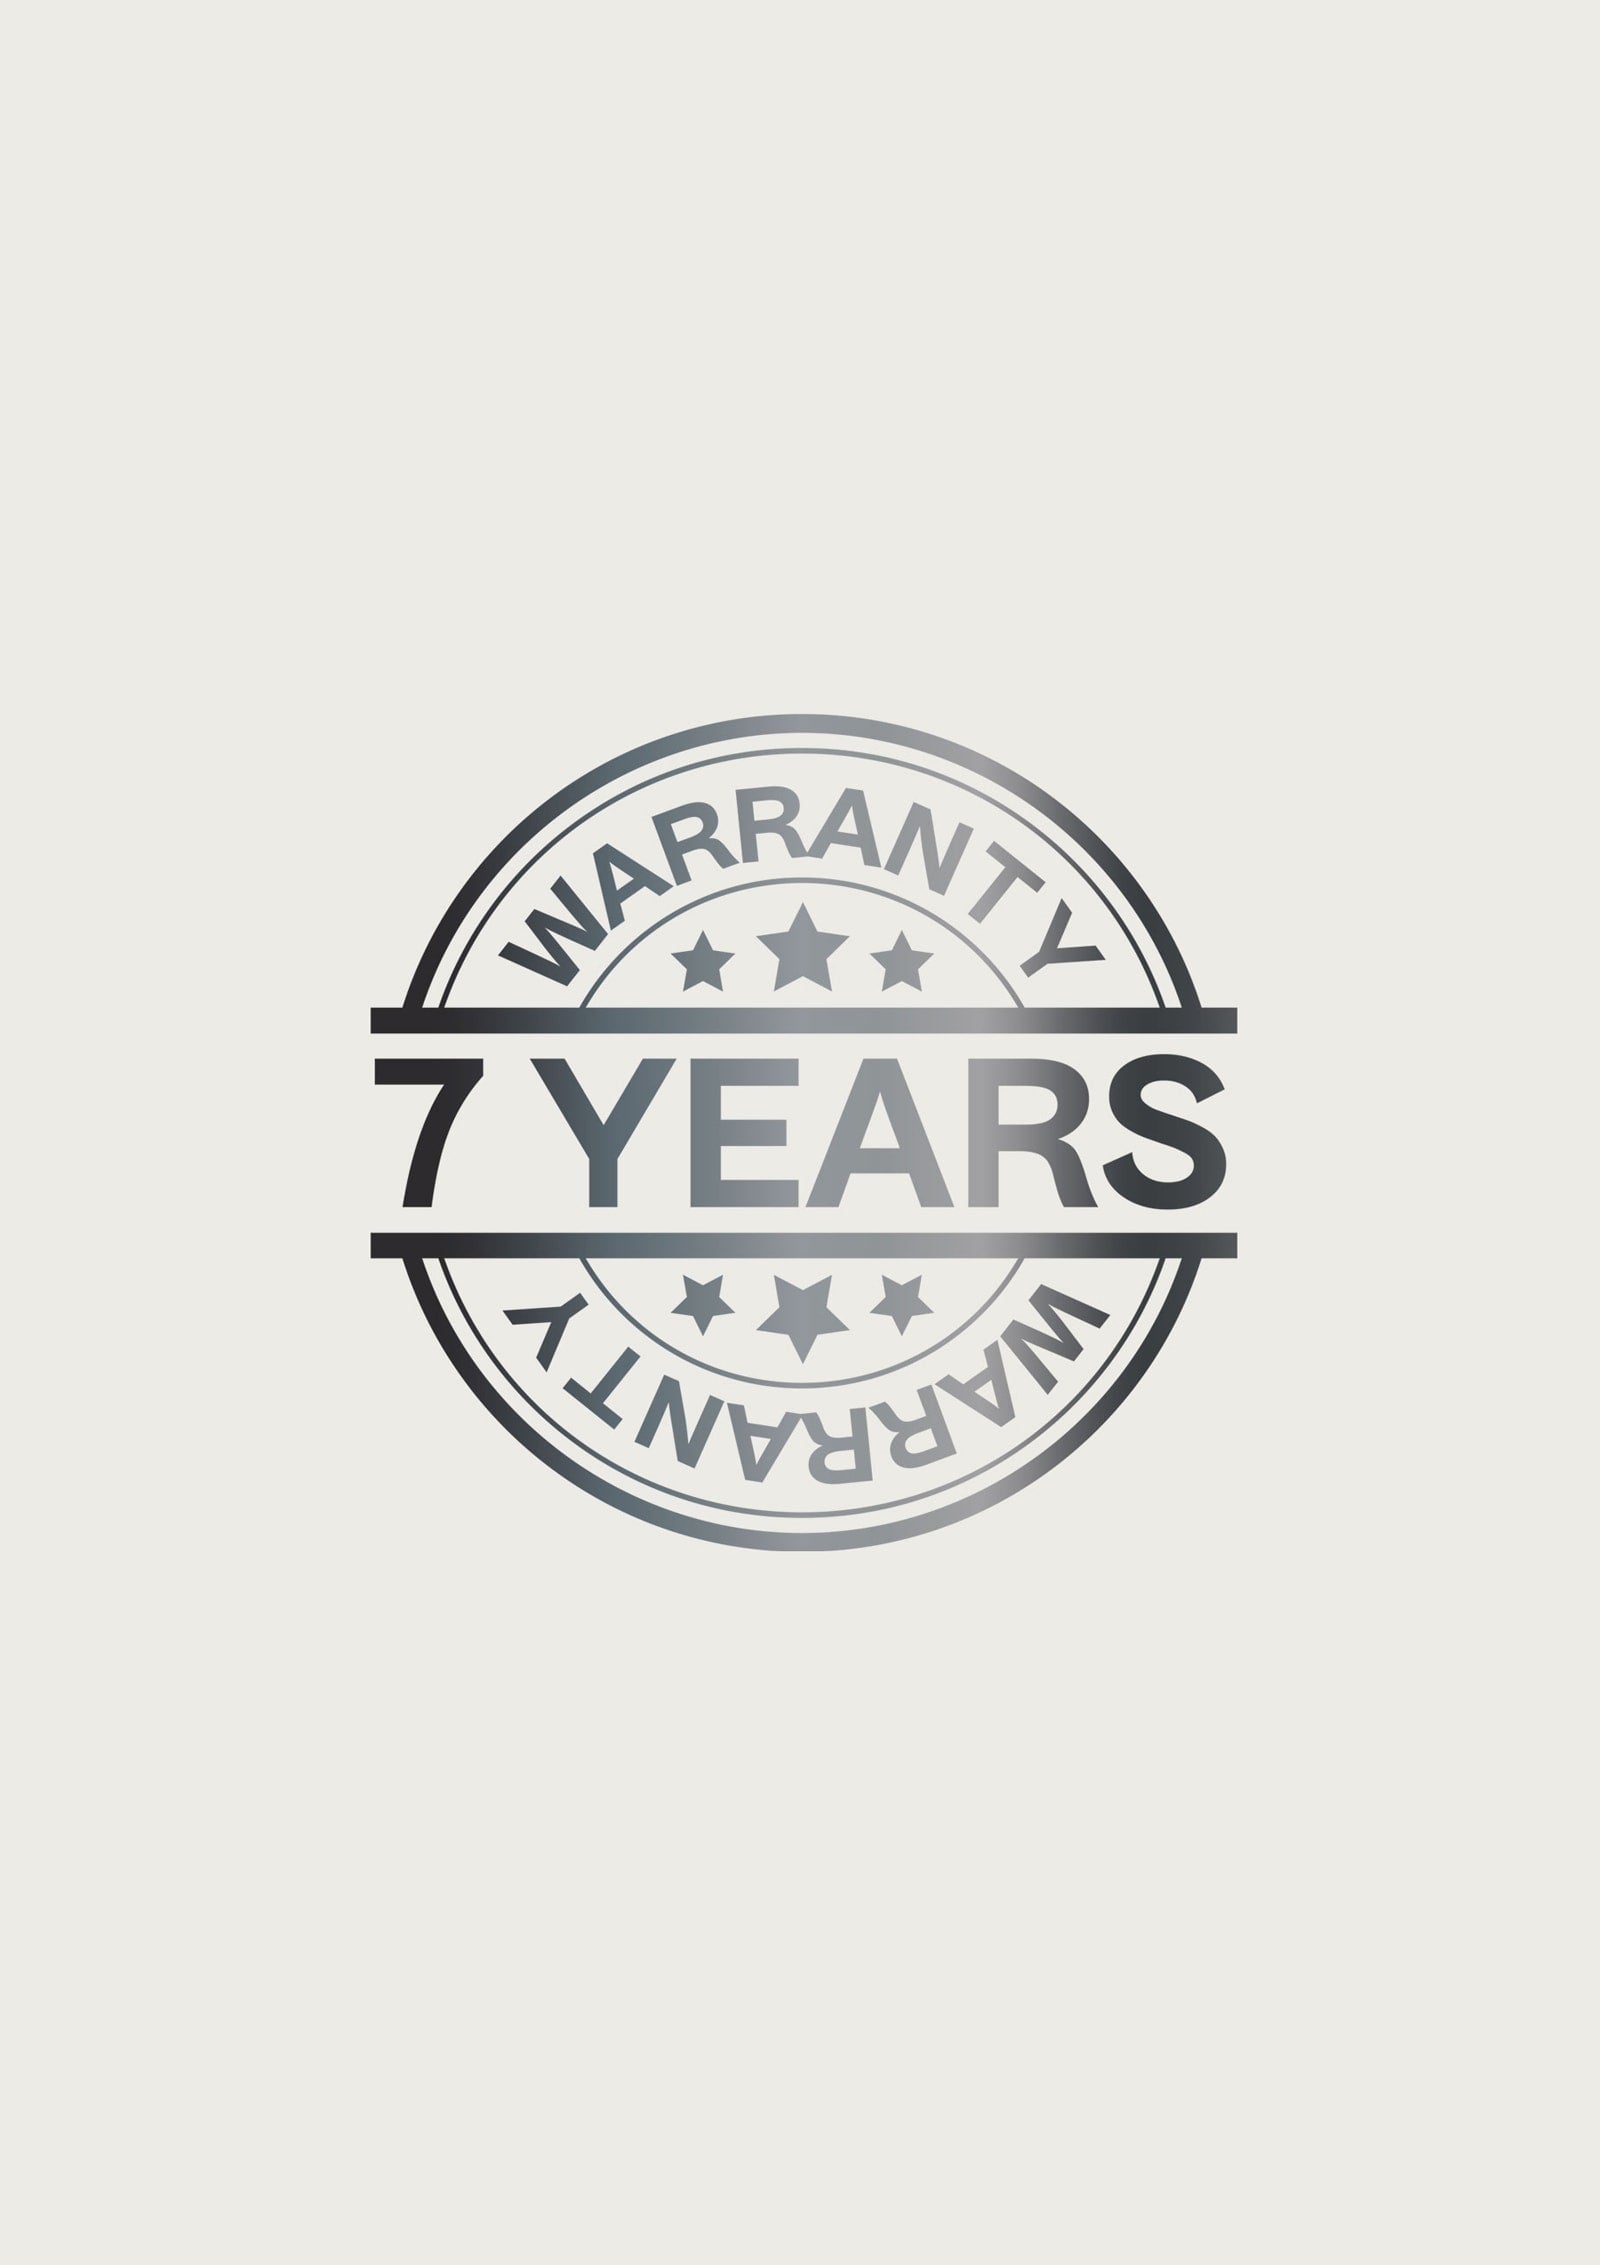 7 Years Extended Warranty